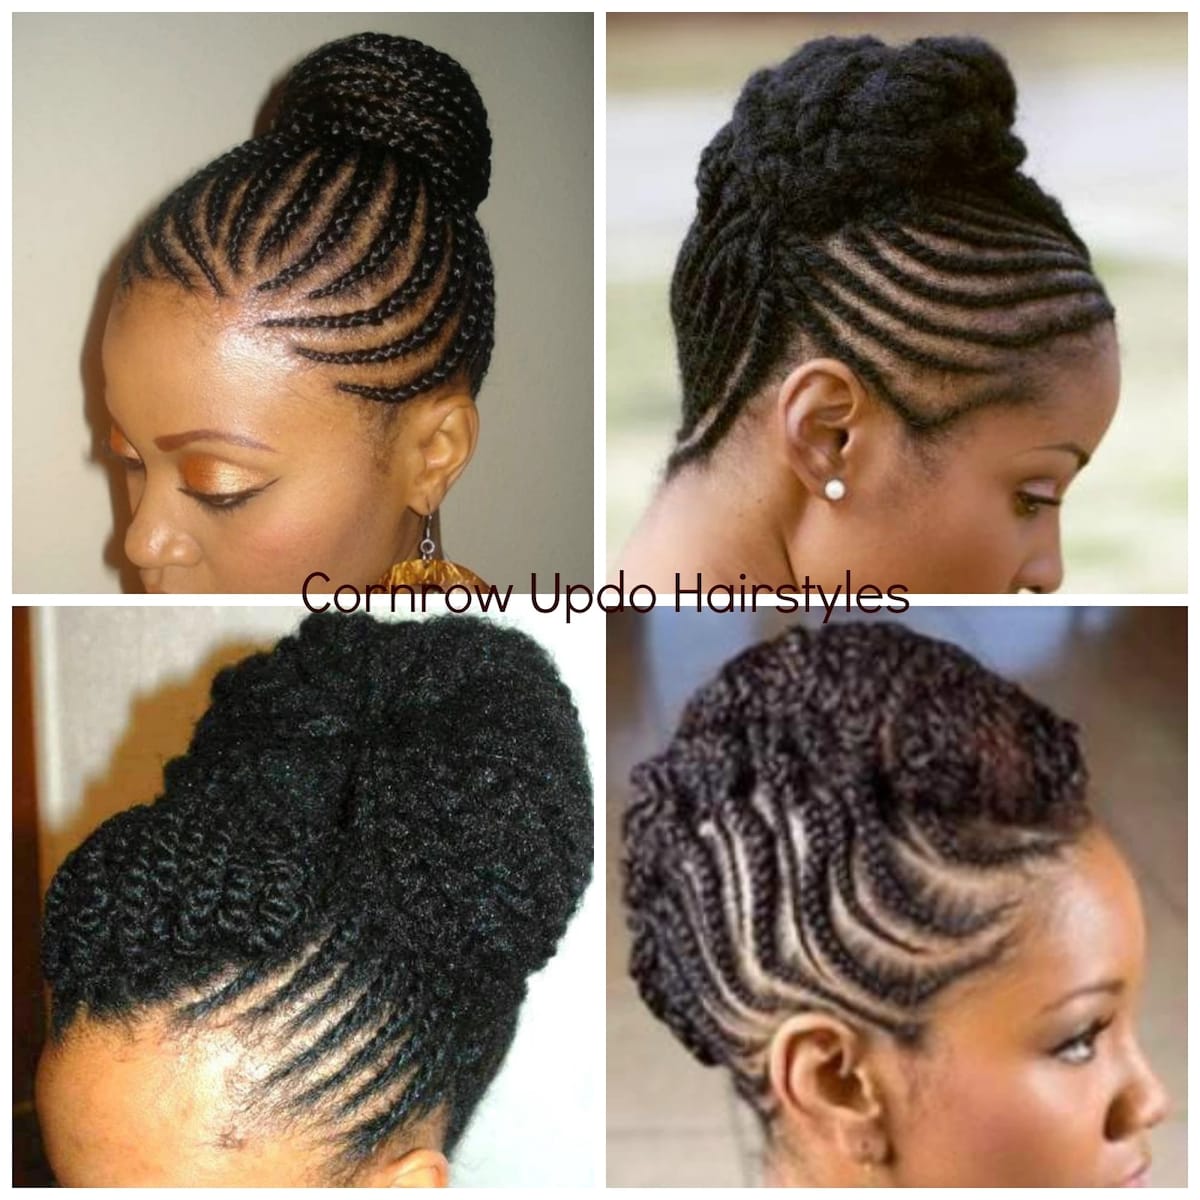 2020 Ghana Weaving Hairstyles. Hi, you think you need different hairstyles  for different occasions … | Cool braid hairstyles, Hair styles, African braids  hairstyles